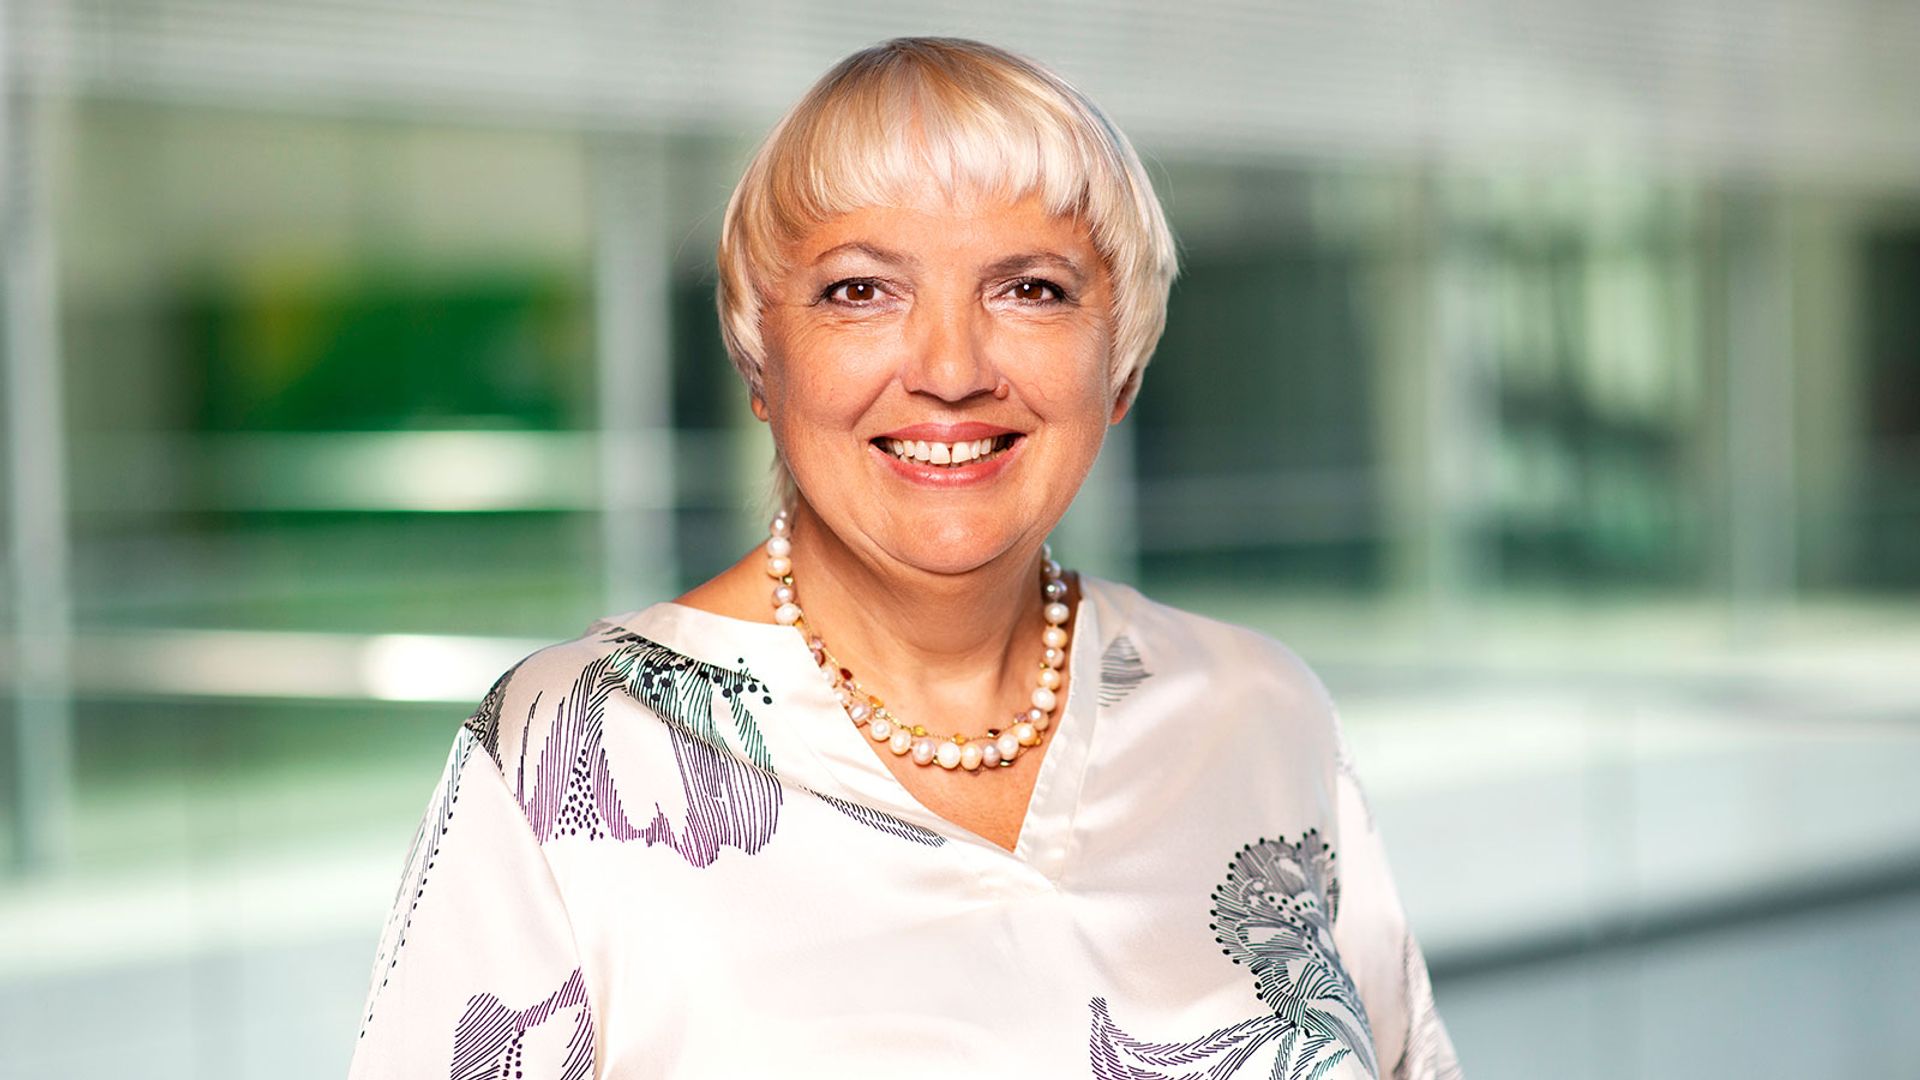 Claudia Roth, 66, has been named Germany's next Culture Minister. Photo: Stefan Kaminski